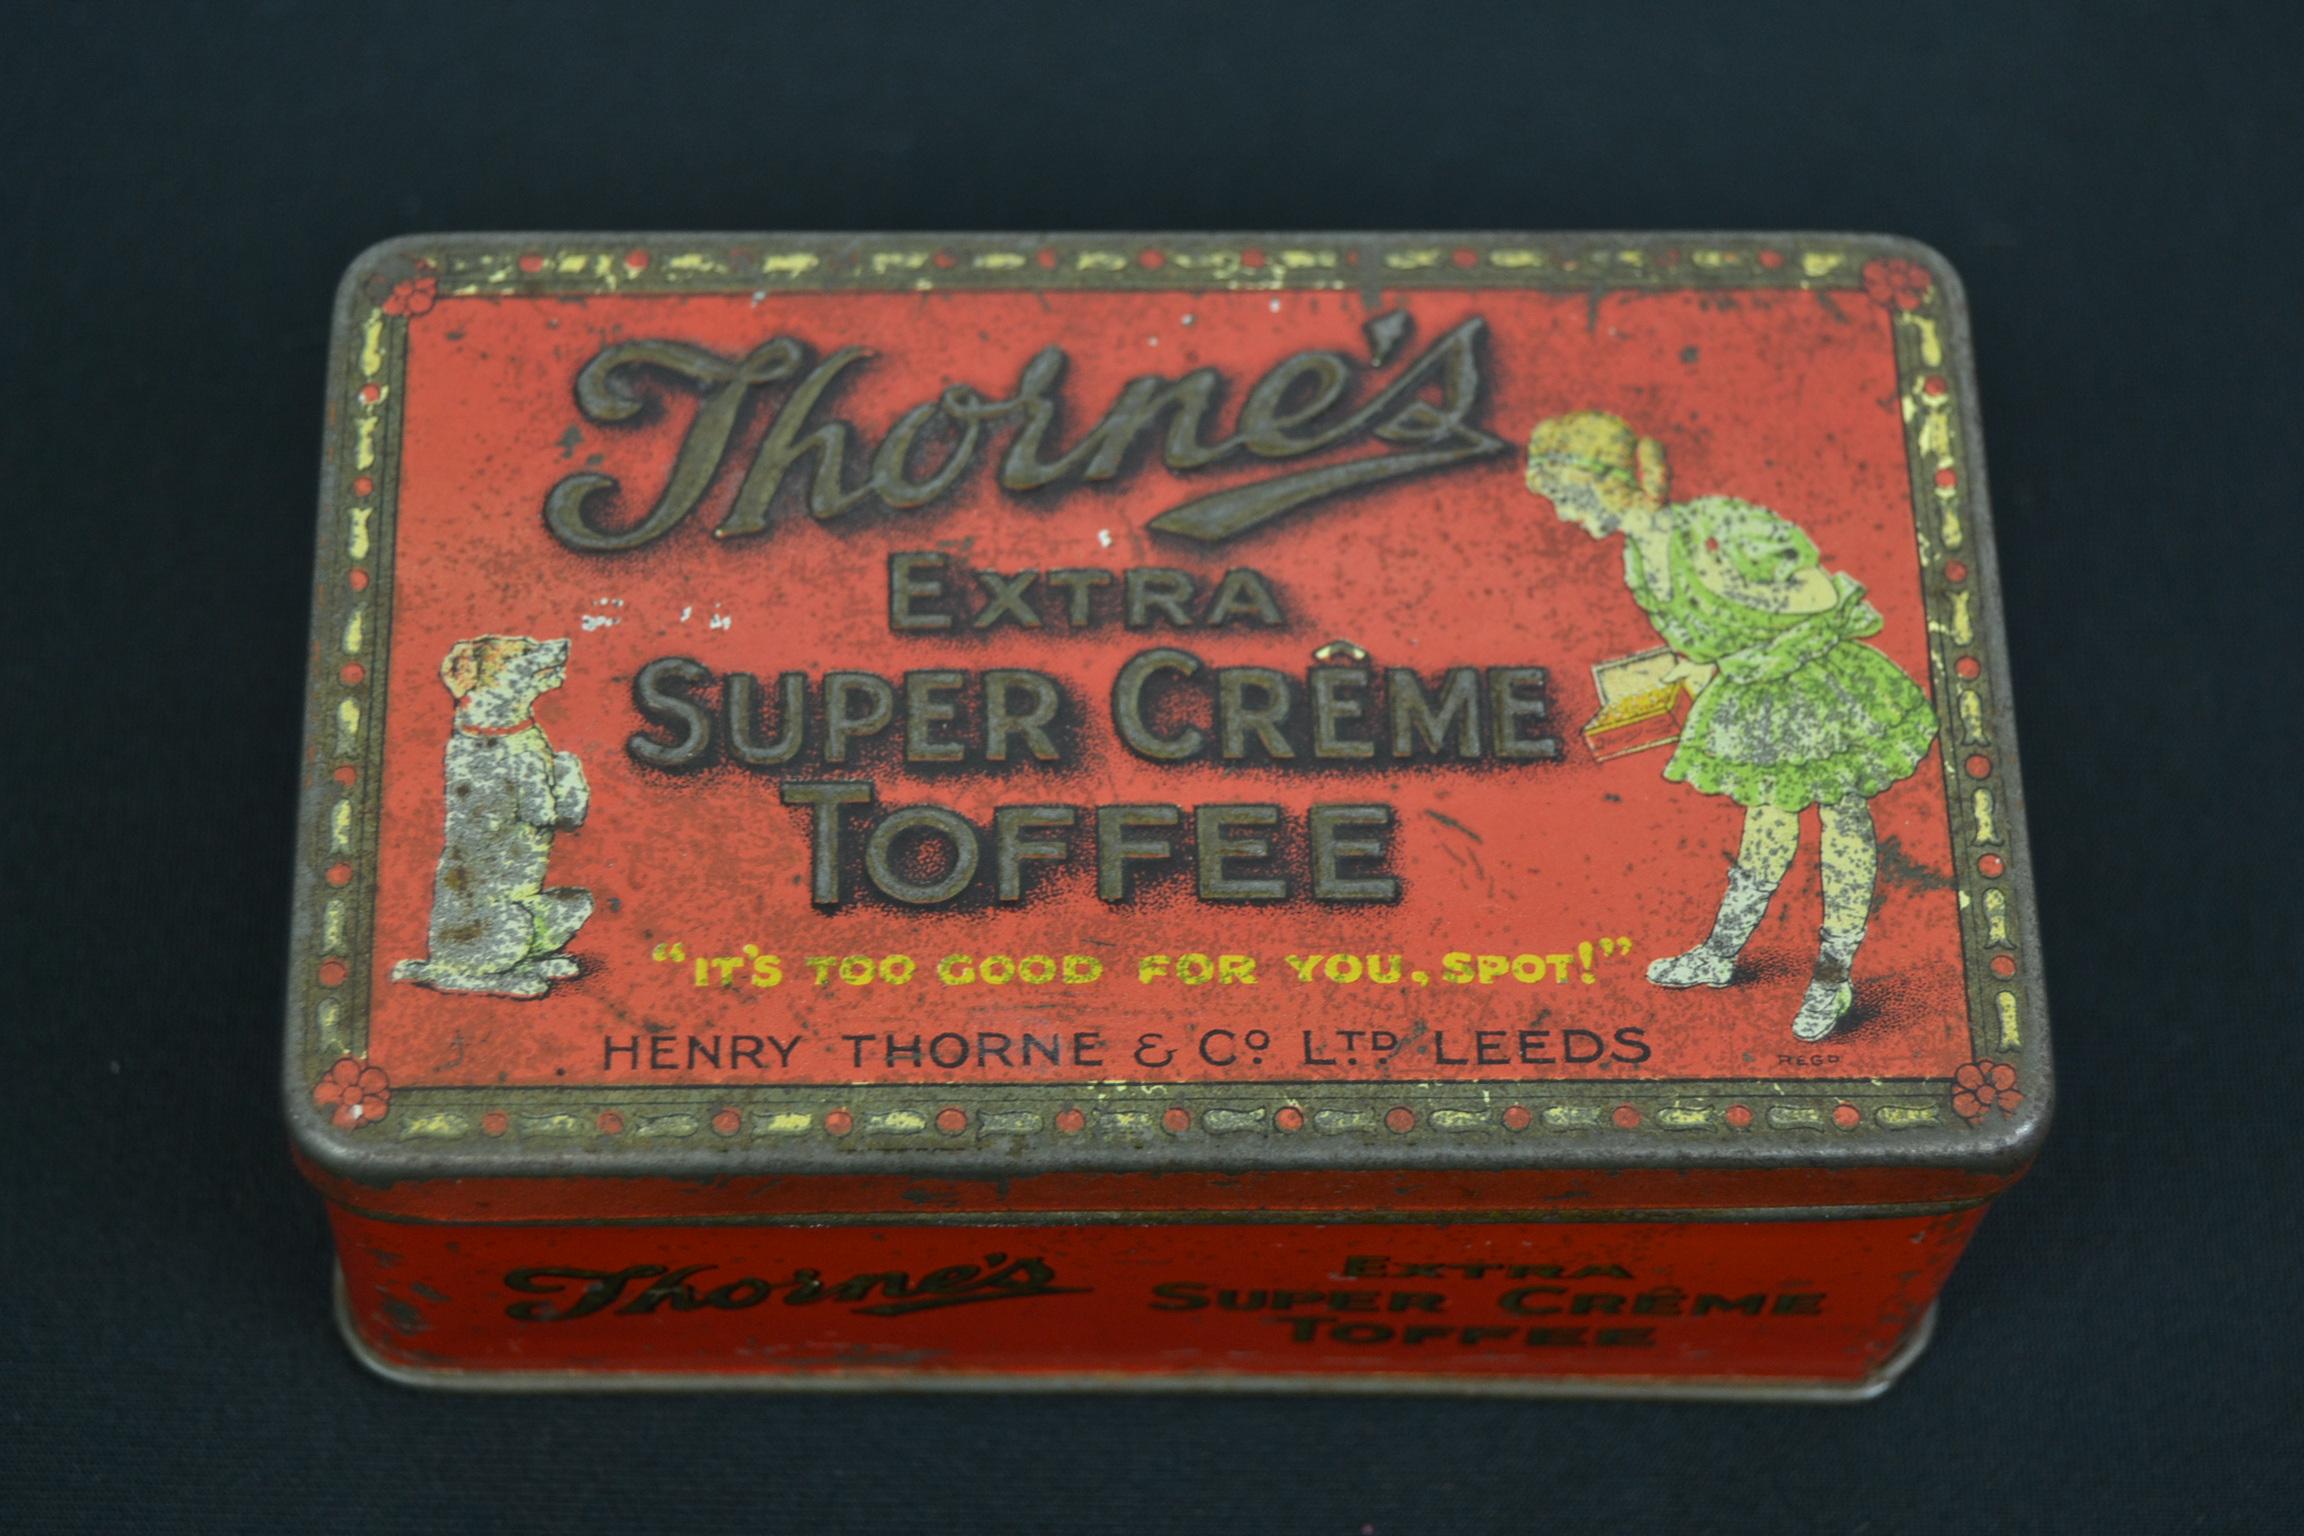 Antique confectionary tin for toffees by Henry Thorne and co, Leeds , England.
A cute small red lithographic tin with a girl and dog and also embossed lettering on the lid. 
A storage tin for extra super Crême toffees. This antique toffee tin or